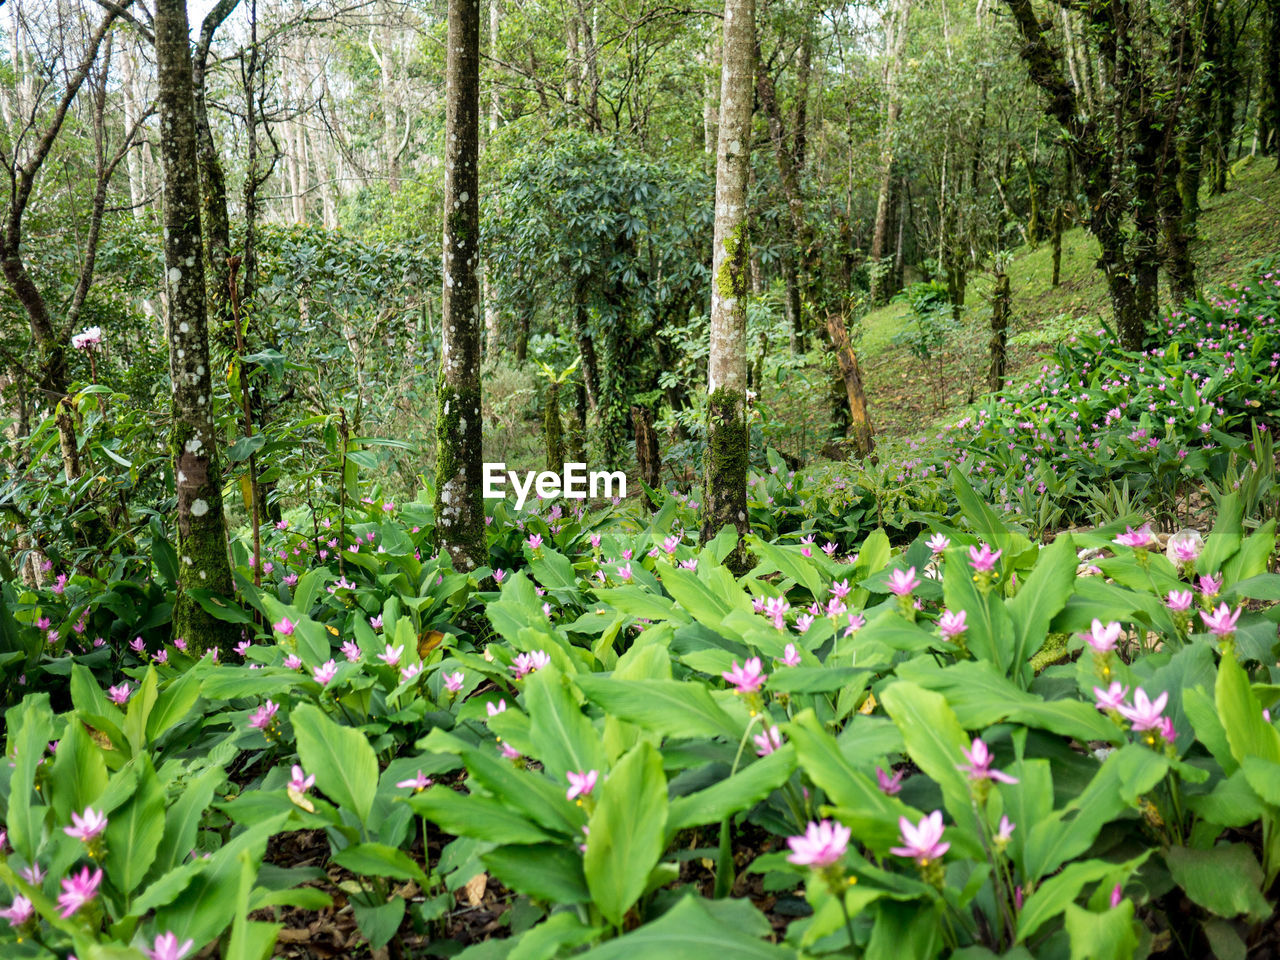 SCENIC VIEW OF FLOWERING PLANTS IN FOREST